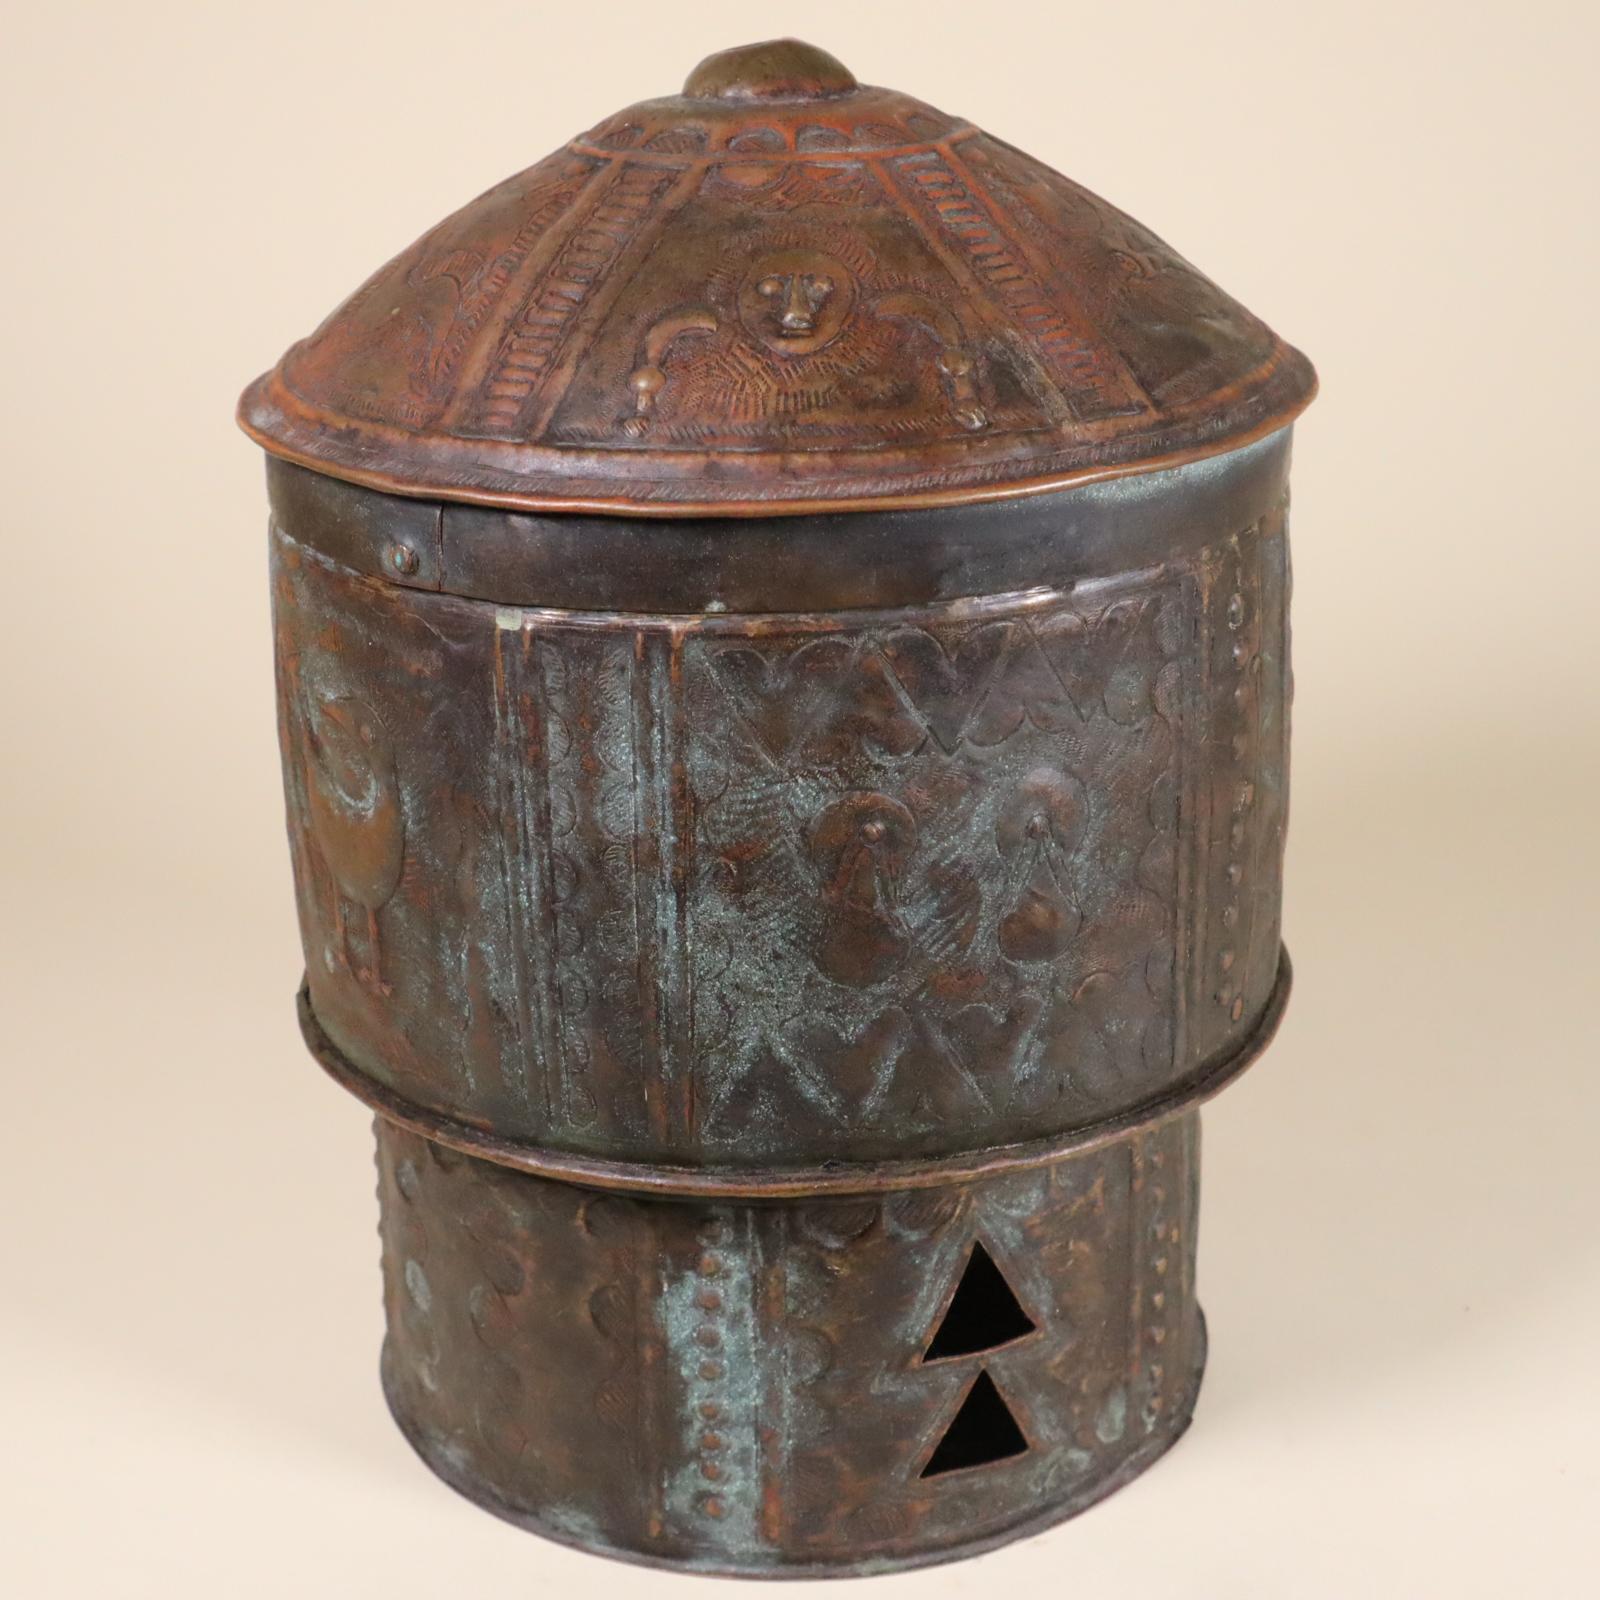 Fine repousse and cut sheet brass or bronze lidded treasure box from the Akan people of Ghana, West Africa, 20th century. Images include human figures, sandals, swords, and animals. These images relate to traditional Akan proverbs and symbolism.